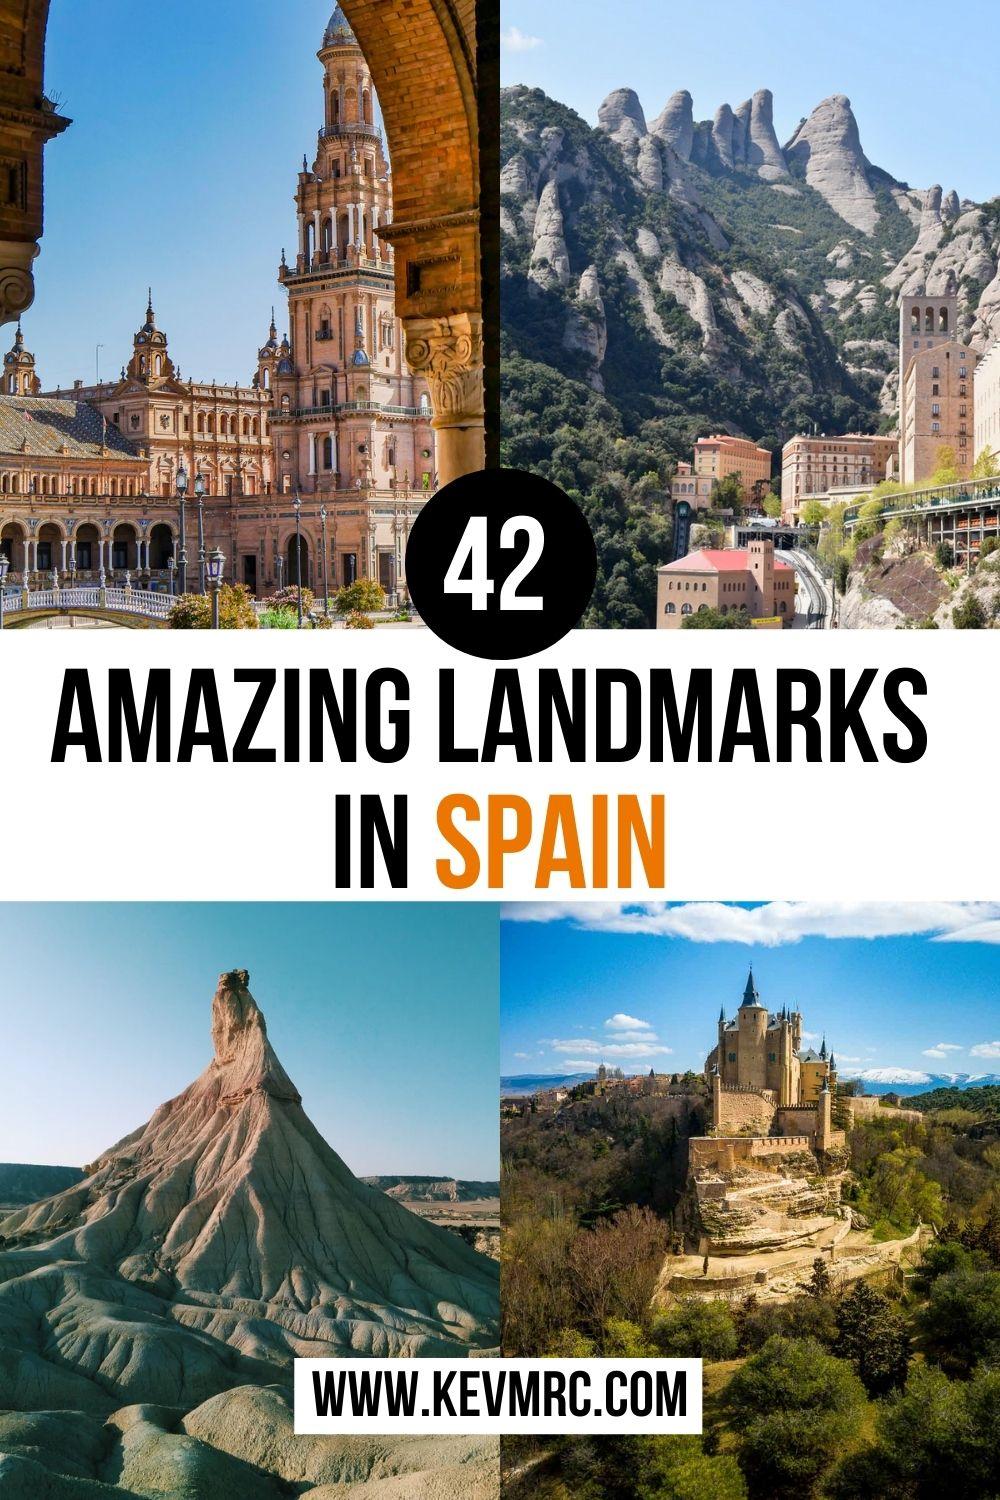 Click to discover the 42 most famous landmarks in Spain! spain travel places to visit | famous buildings in spain | spain landmarks and attractions | spain landmarks list | bucket list things to do in spain